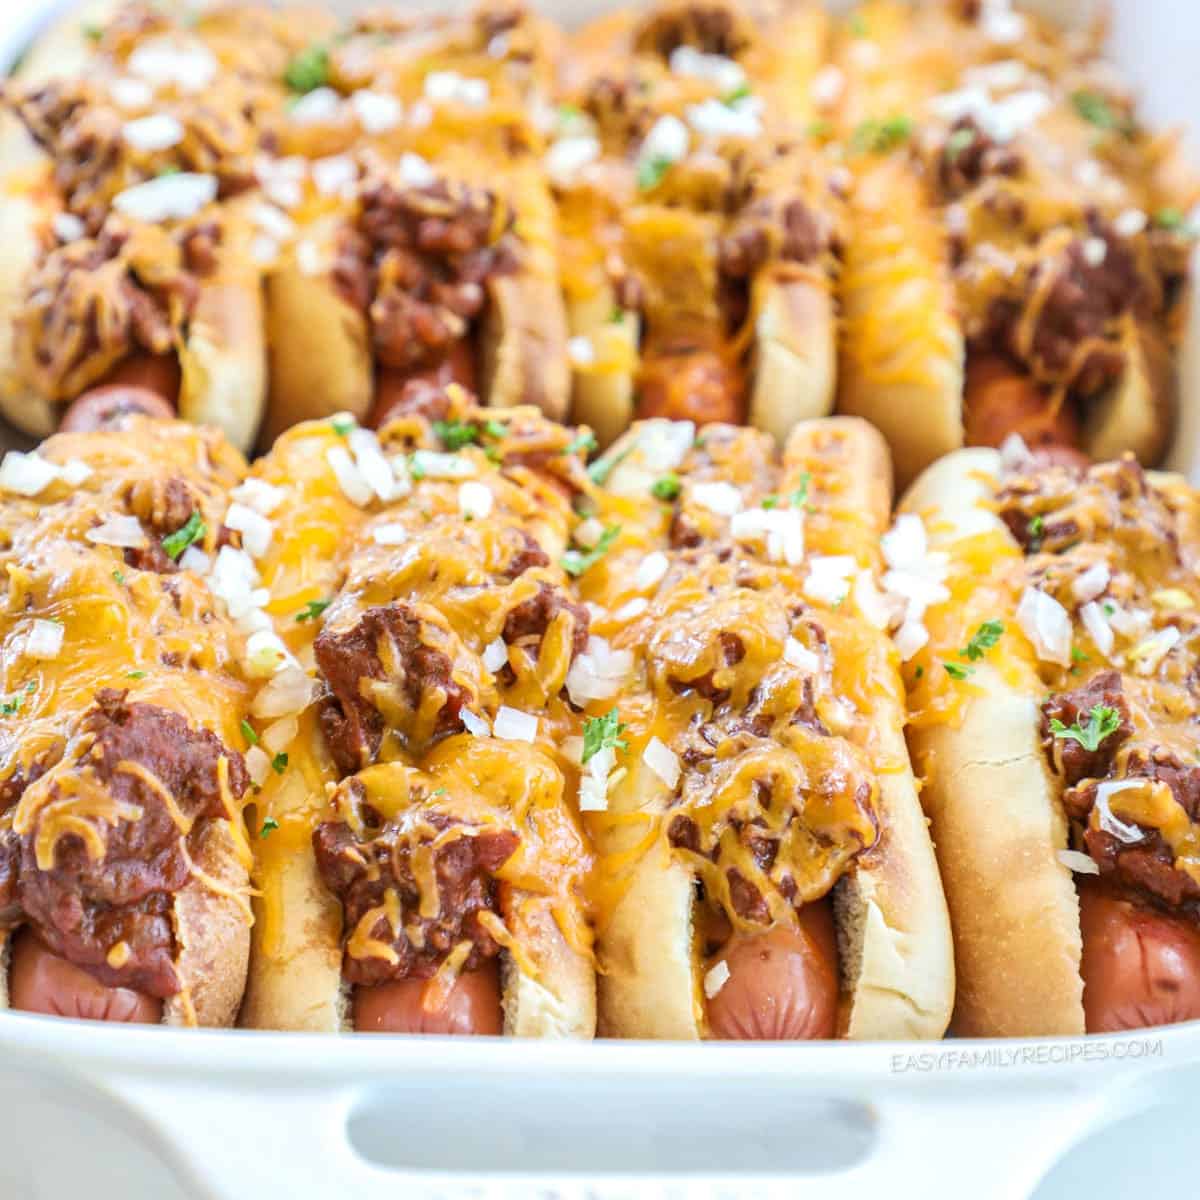 Baked Chili Dogs Recipe